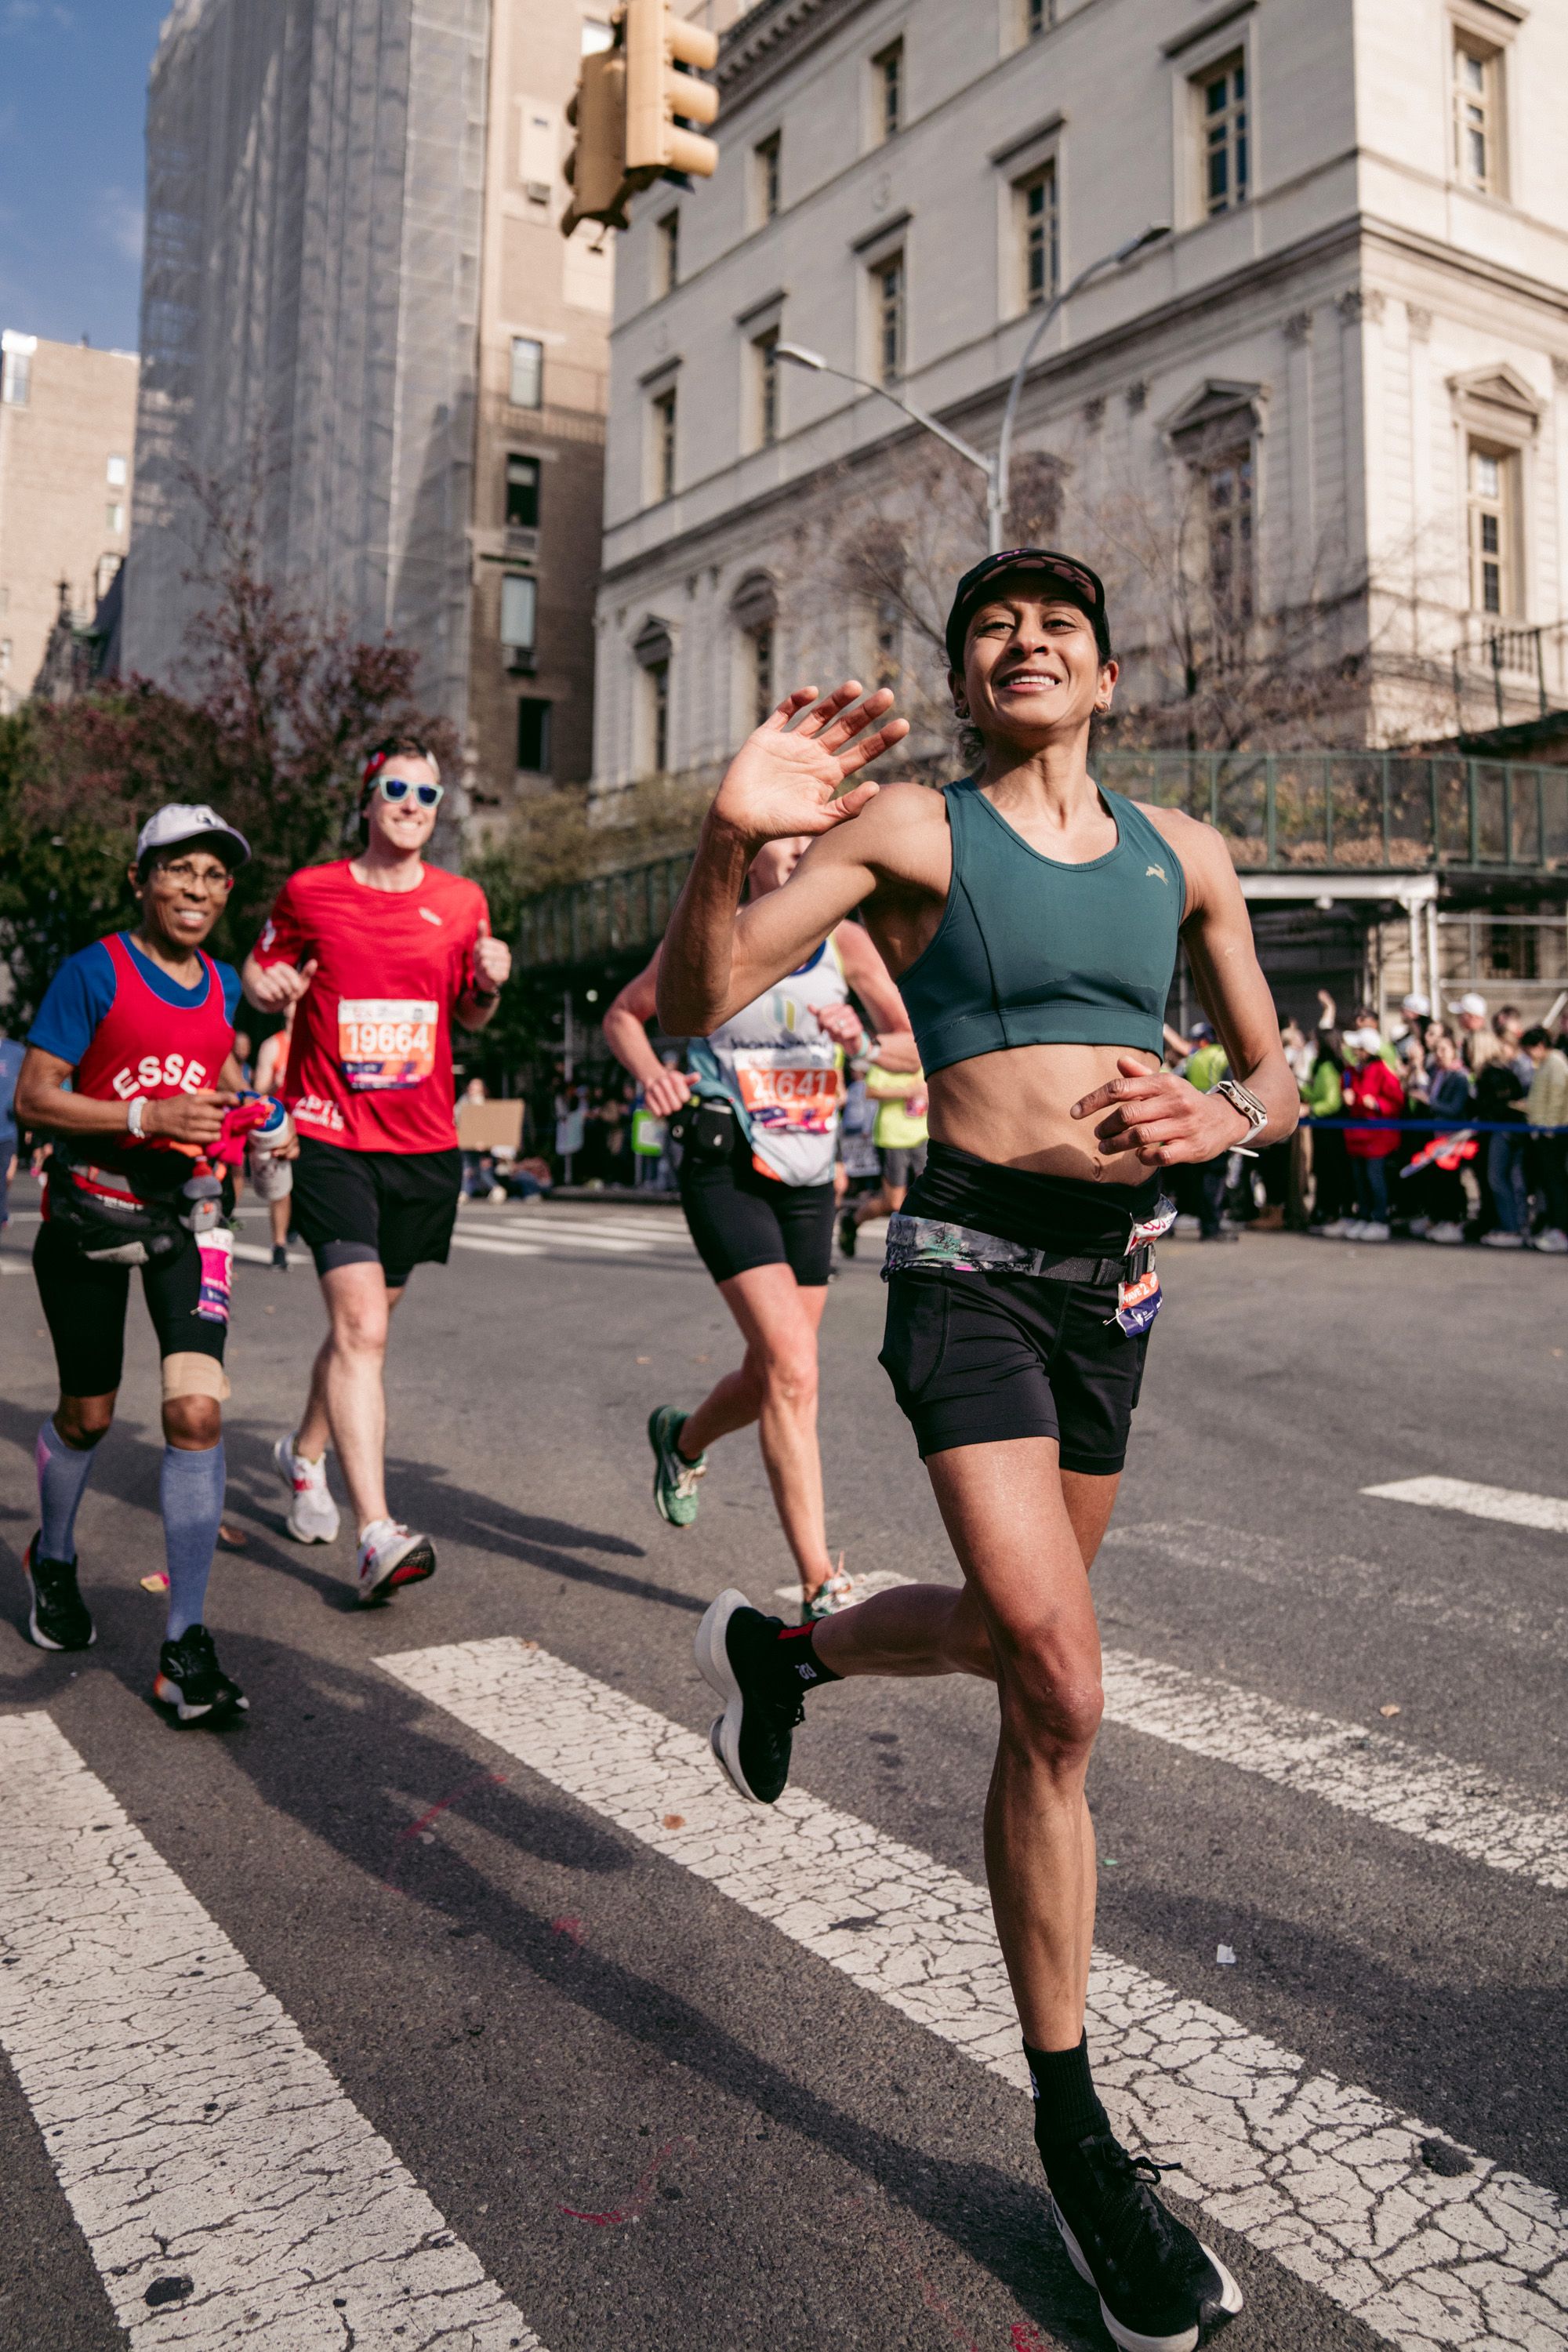 How long does it take to train for a marathon? Experts explain